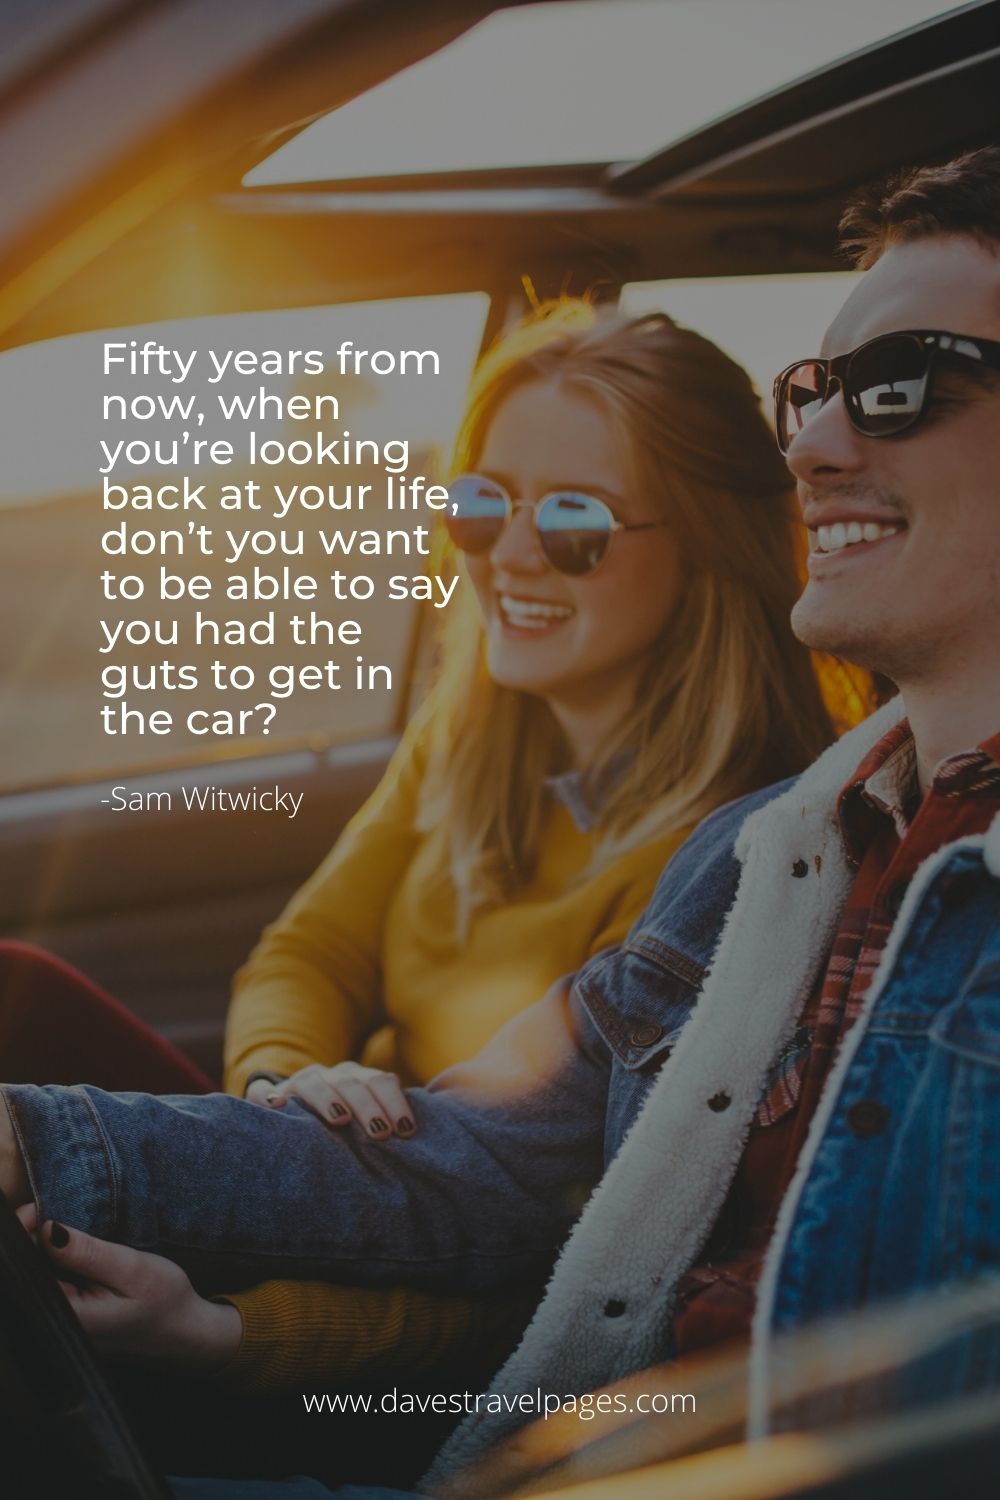 Fifty years from now, when you’re looking back at your life, don’t you want to be able to say you had the guts to get in the car?